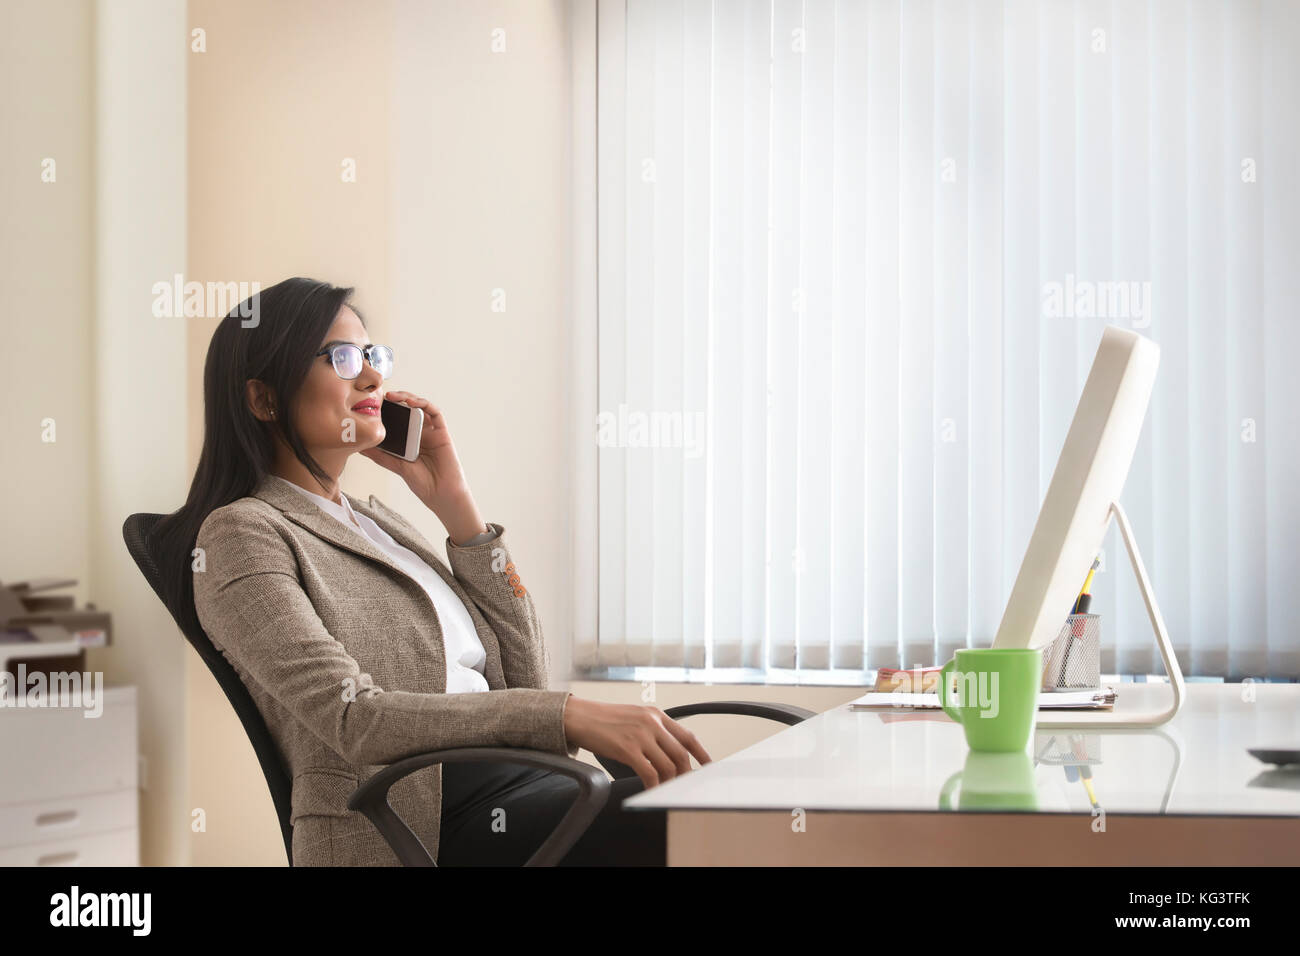 Businesswoman talking on mobile phone in office Banque D'Images